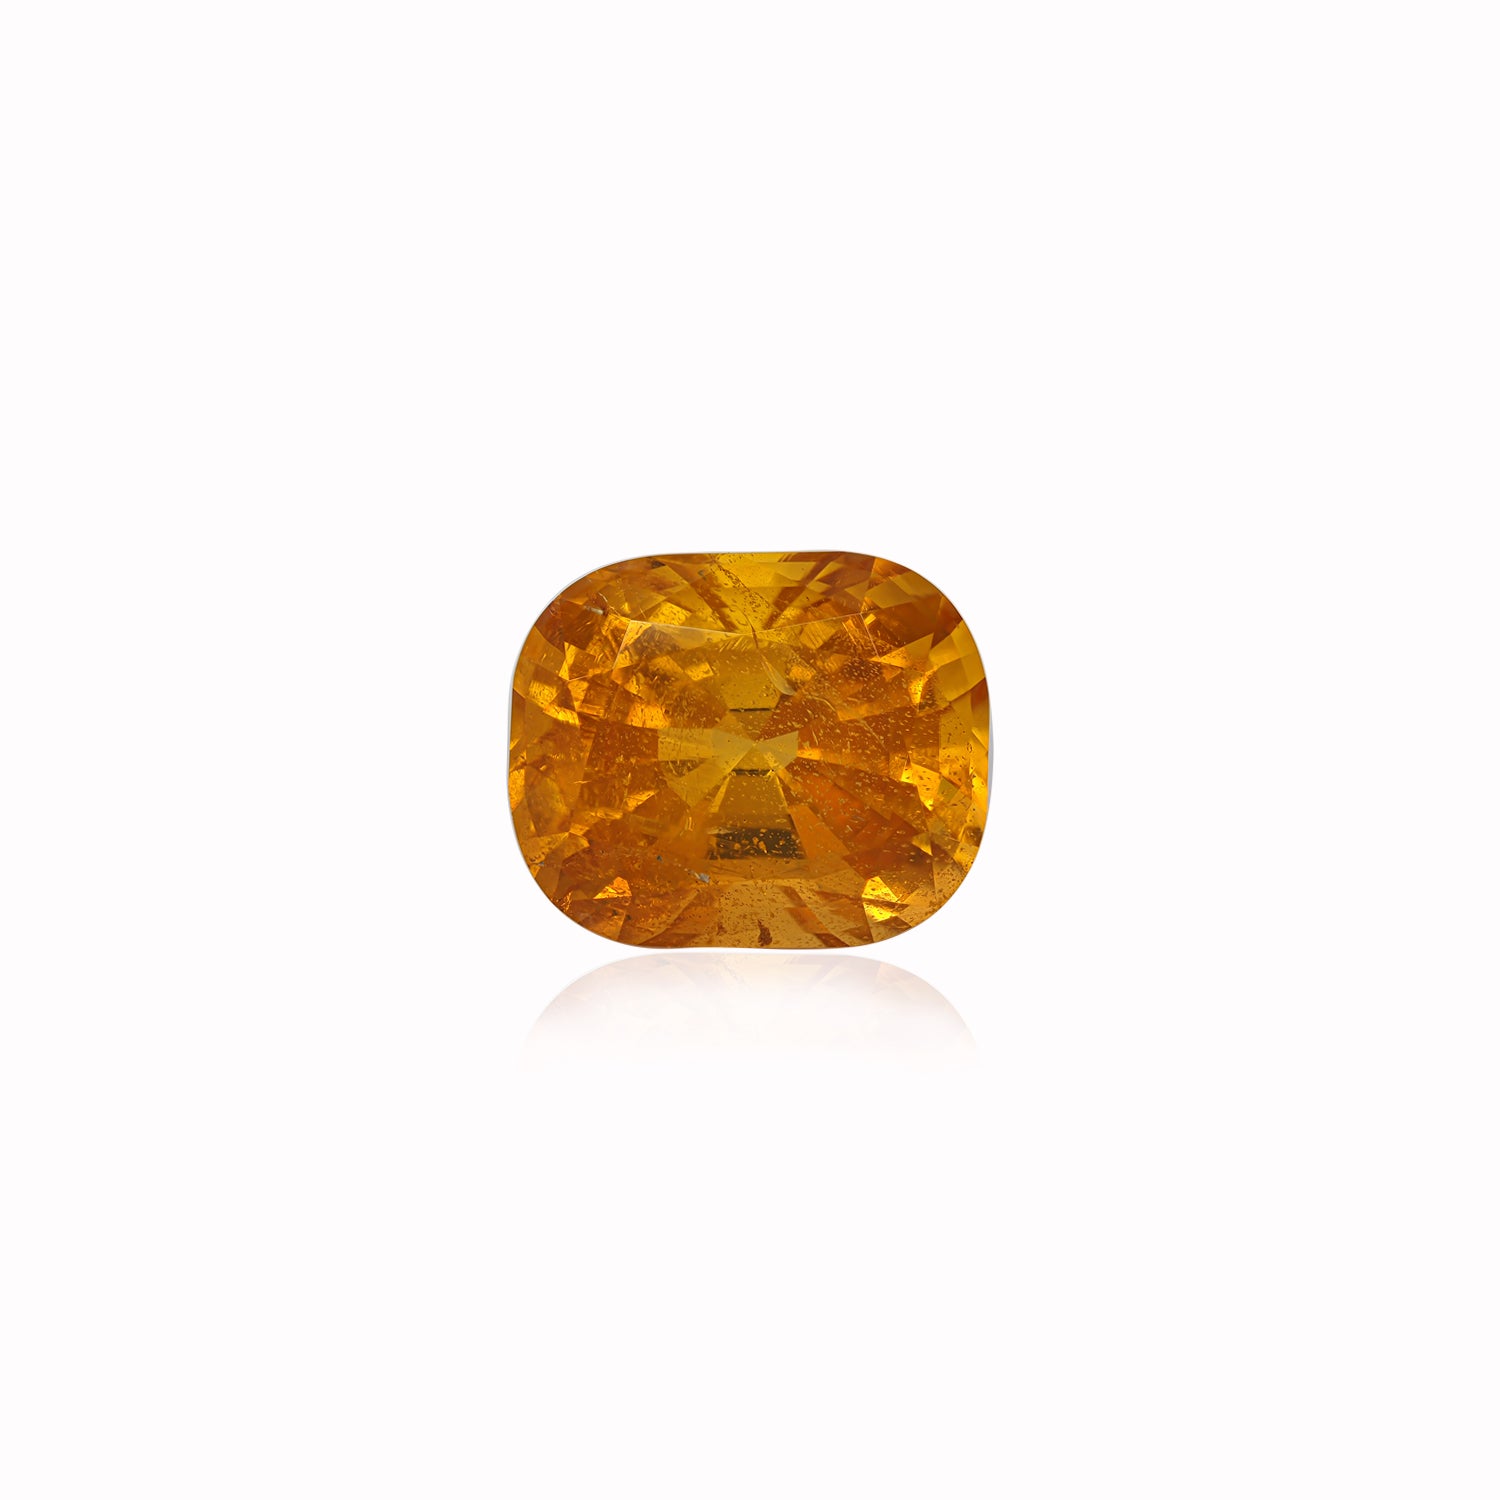 Clinohumite (Fire Spinel) 15.03 CT